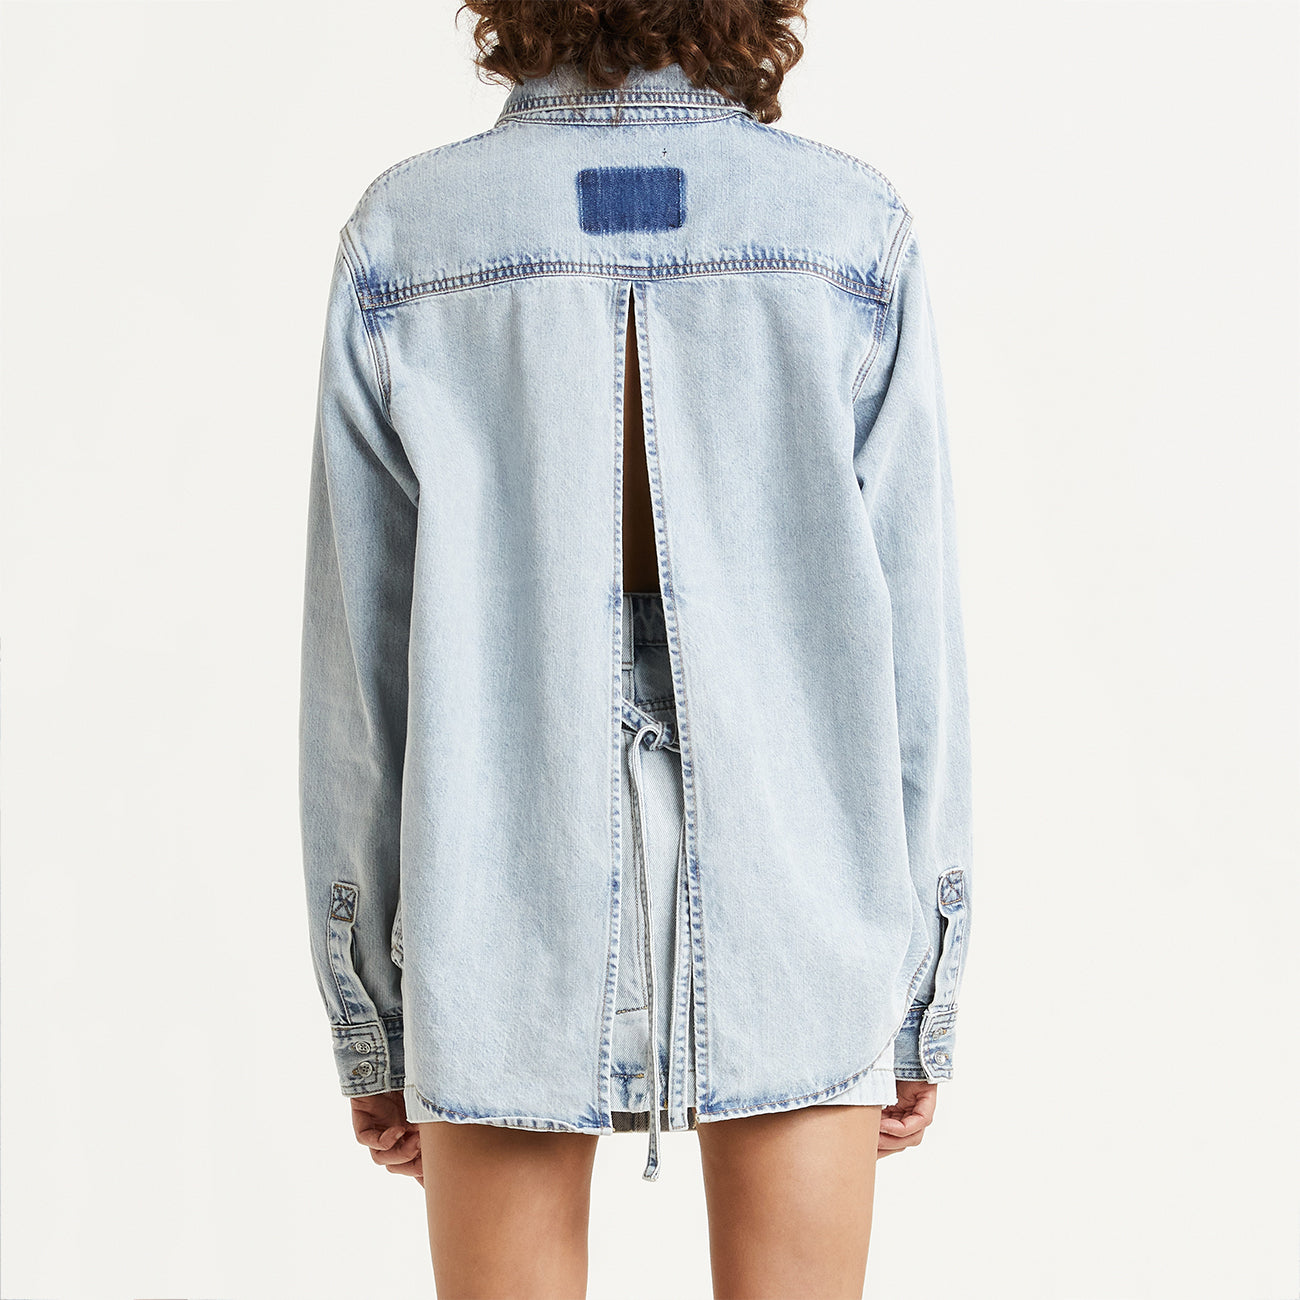 W WEST END SHIRT CHAMBRAY